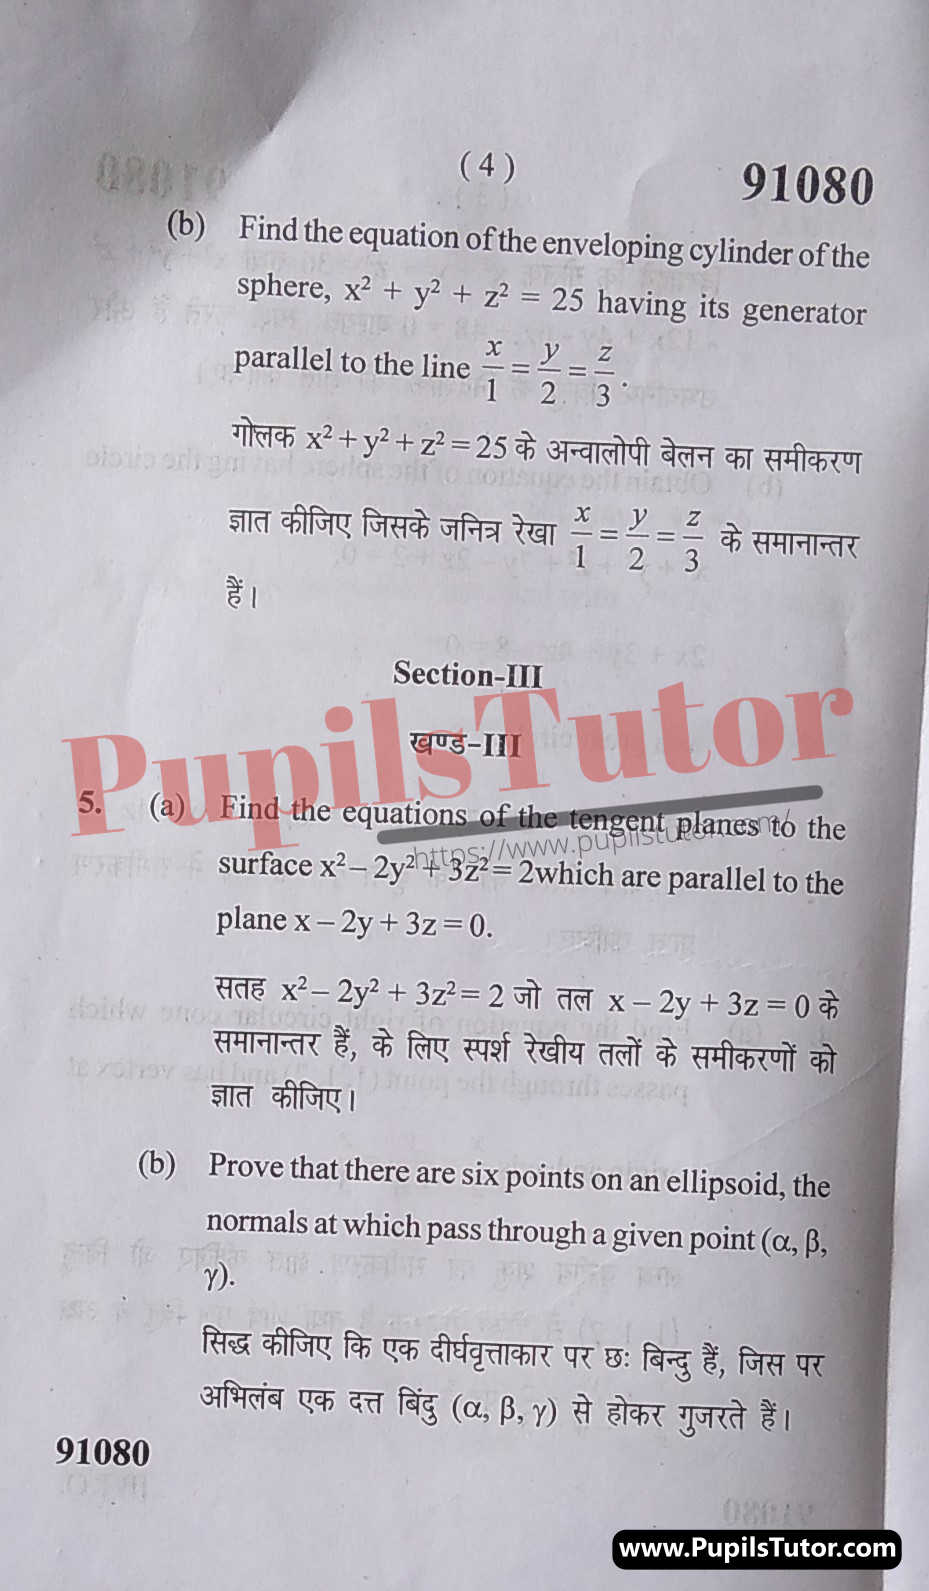 MDU (Maharshi Dayanand University, Rohtak Haryana) Pass Course (B.Sc. [Maths] – Bachelor of Science) Solid Geometry Important Questions Of February, 2022 Exam PDF Download Free (Page 4)